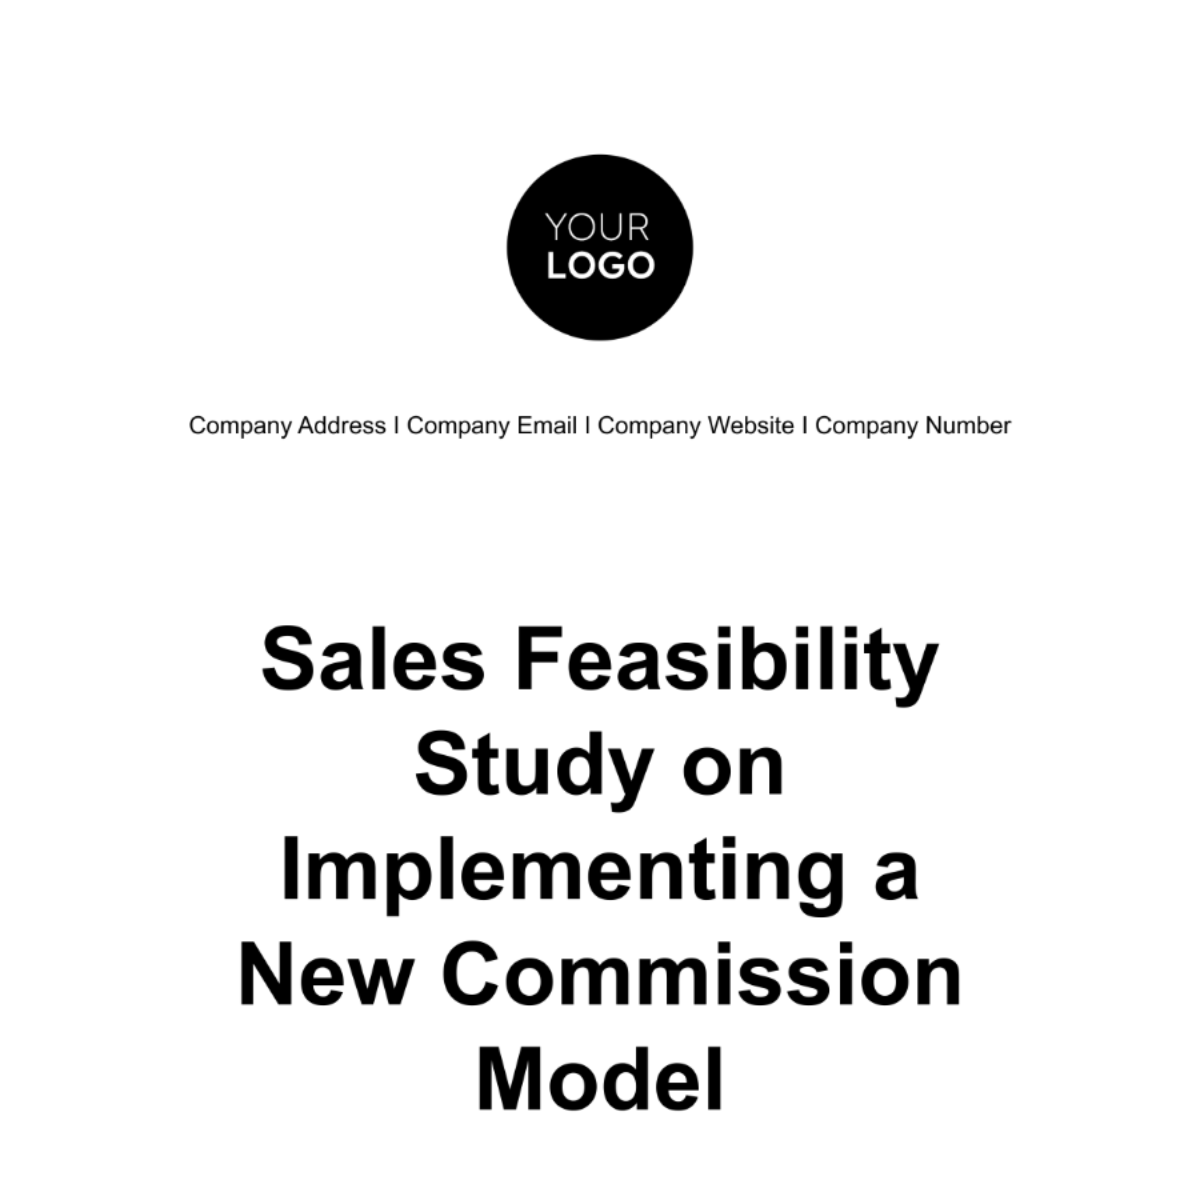 Free Sales Feasibility Study on Implementing a New Commission Model Template